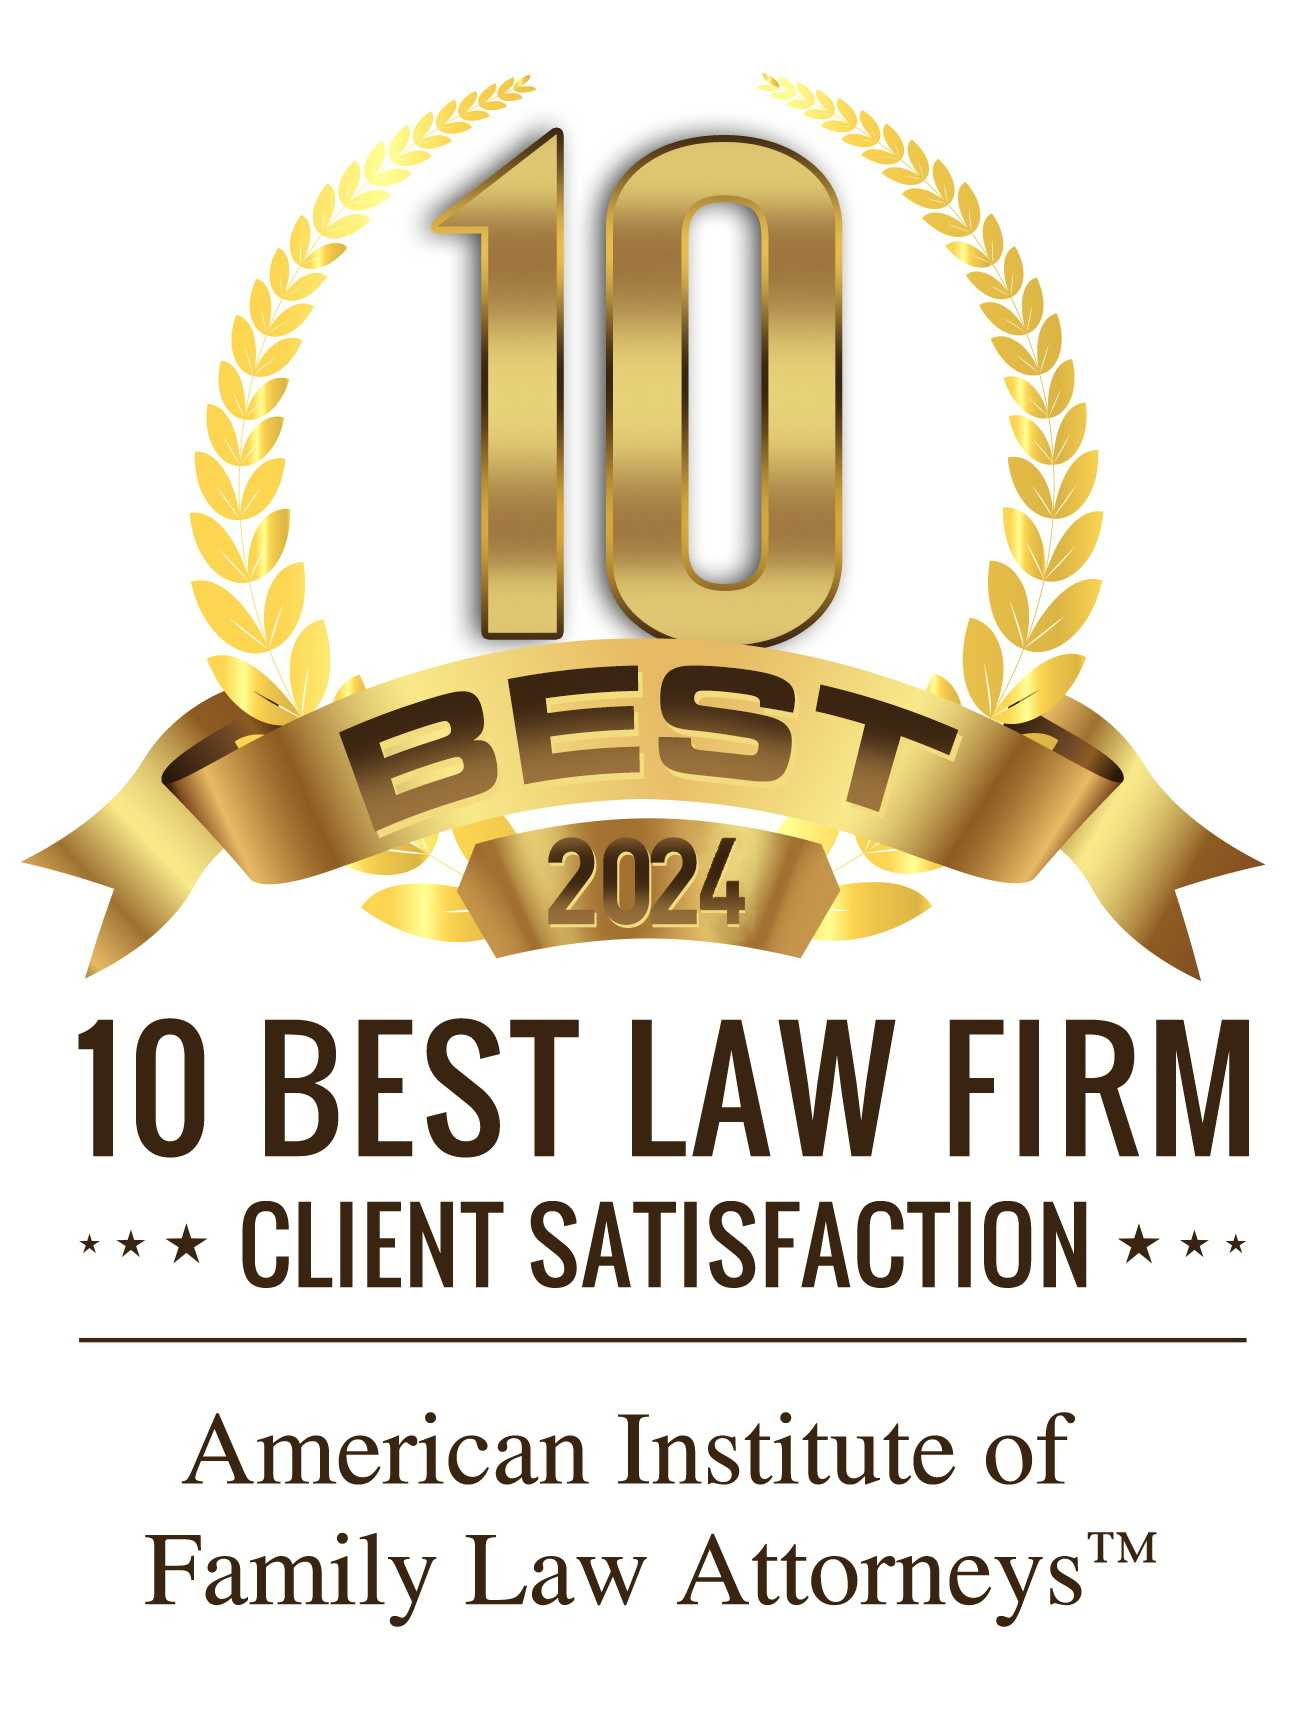 10 best law firm